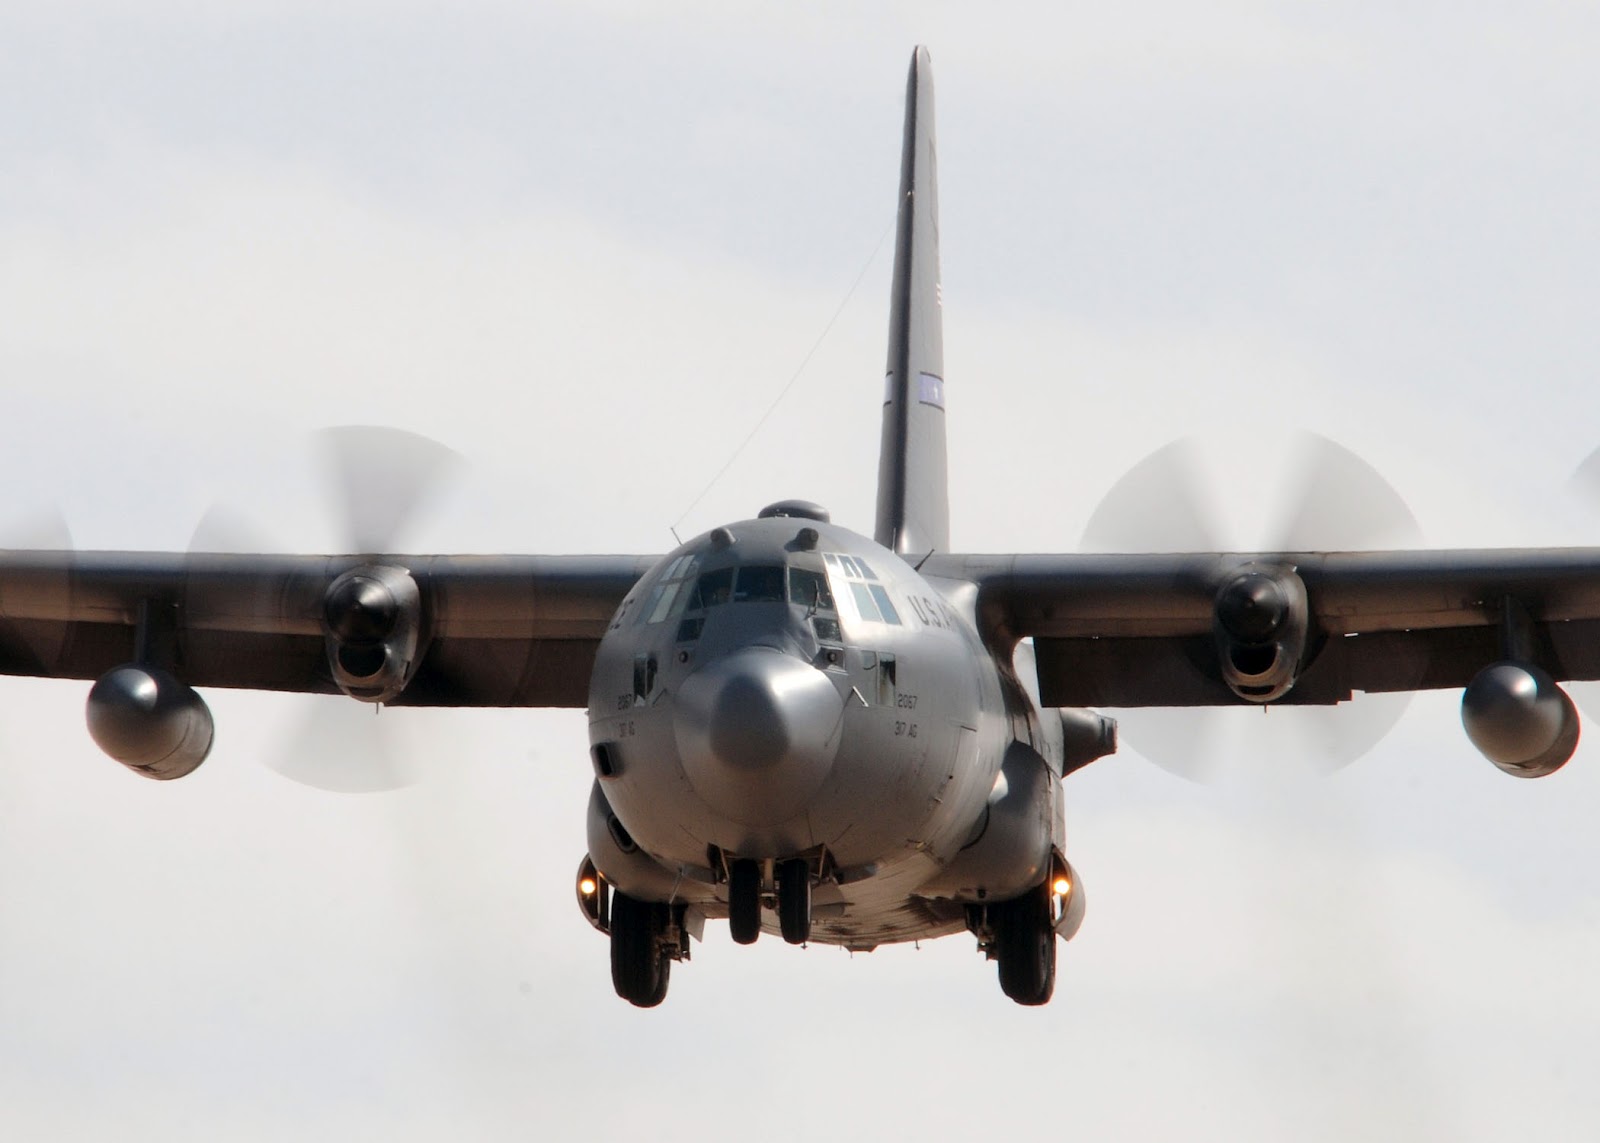 The Hercules C-130 United States Air Force Aircraft Wallpaper